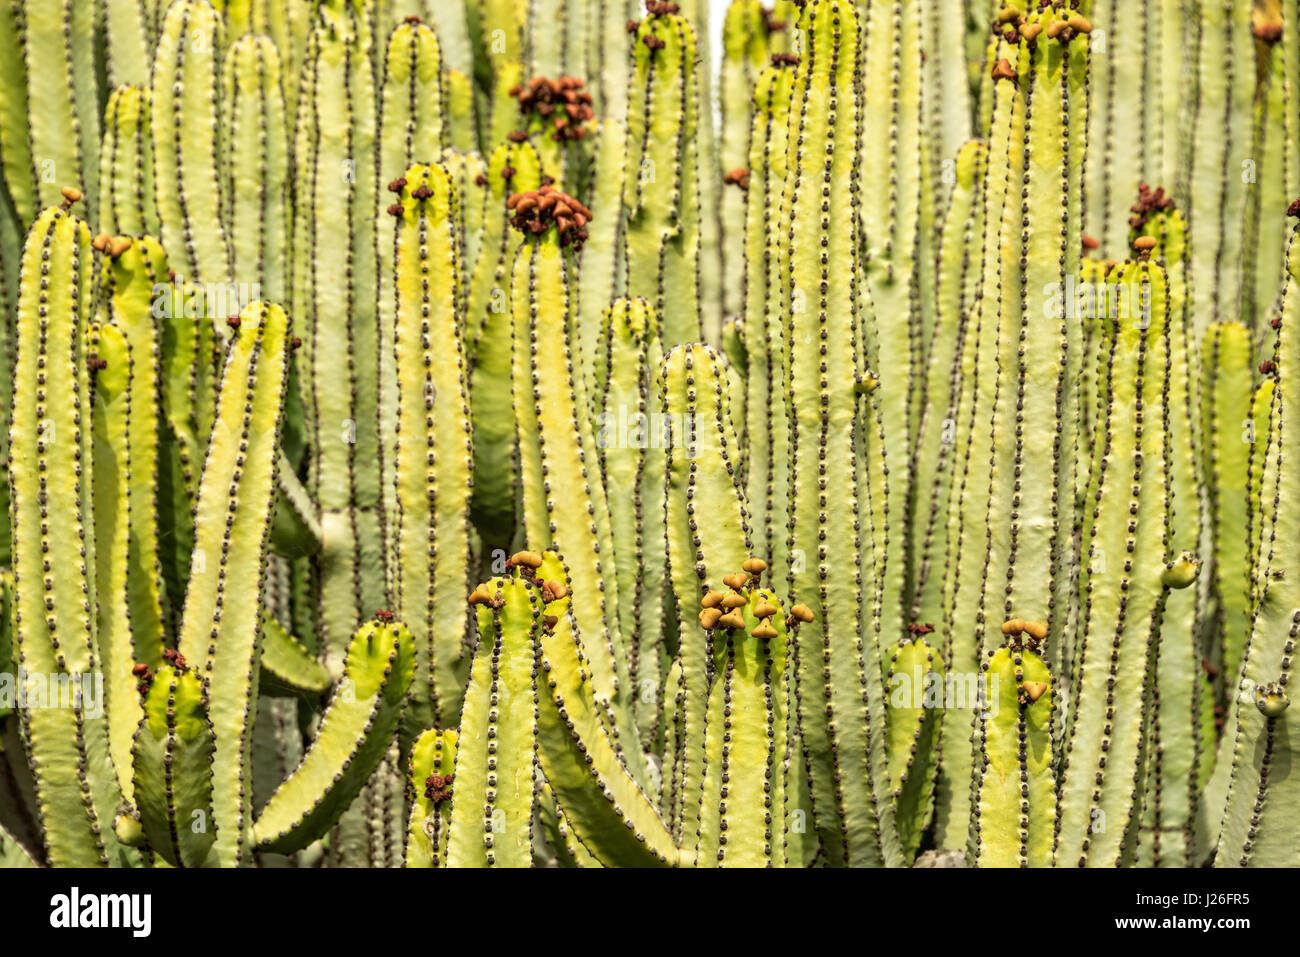 Abstract textured background, close up of Euphorbia candelabrum, a giant succulent plant Stock Photo